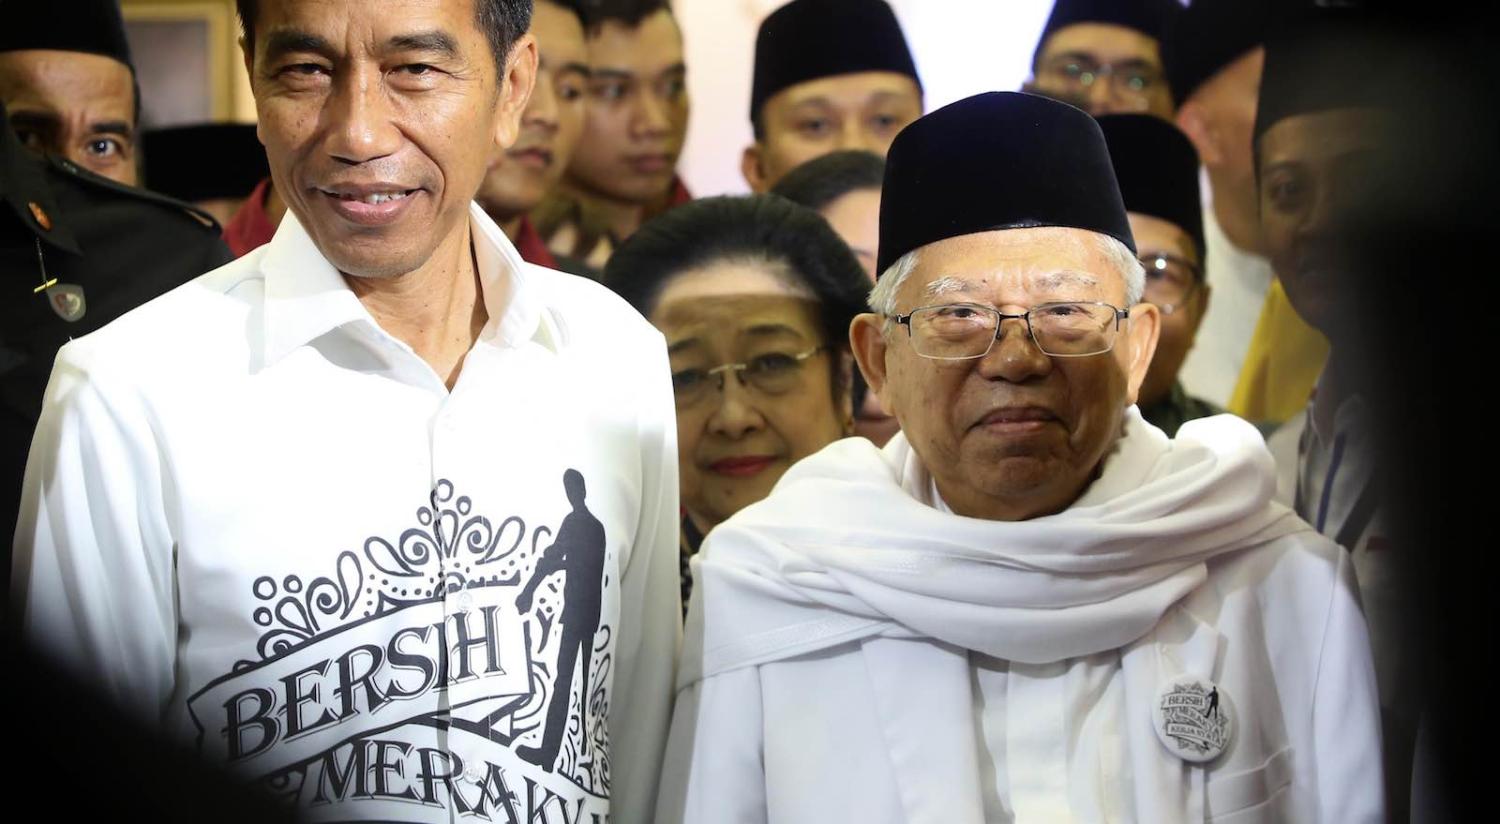 Indonesia's President Joko Widodo registers with Ma’ruf Amin as running mate for the April 2019 presidential contest, 10 August (Photo: Jefri Tarigan via Getty)